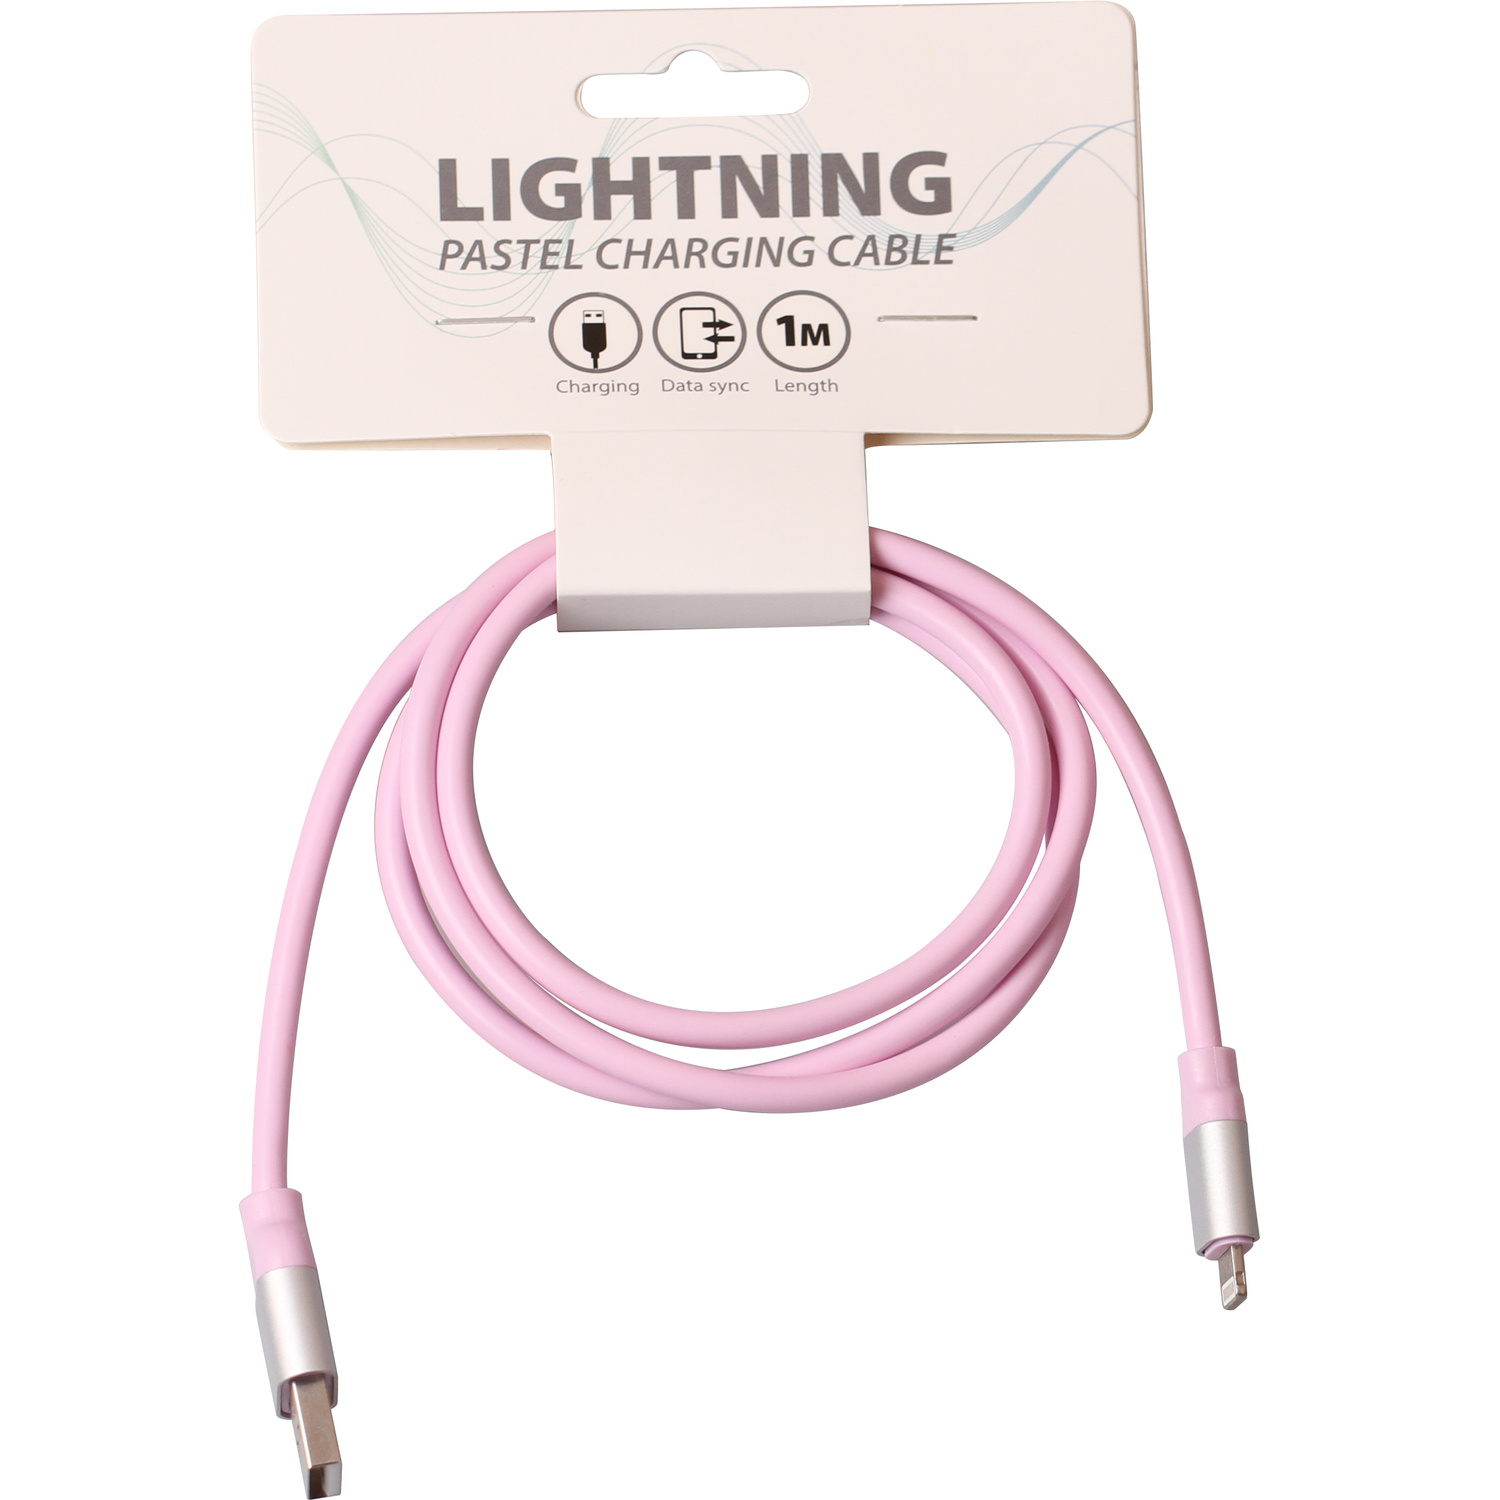 Lightning Pastel Charging Cable Image 3